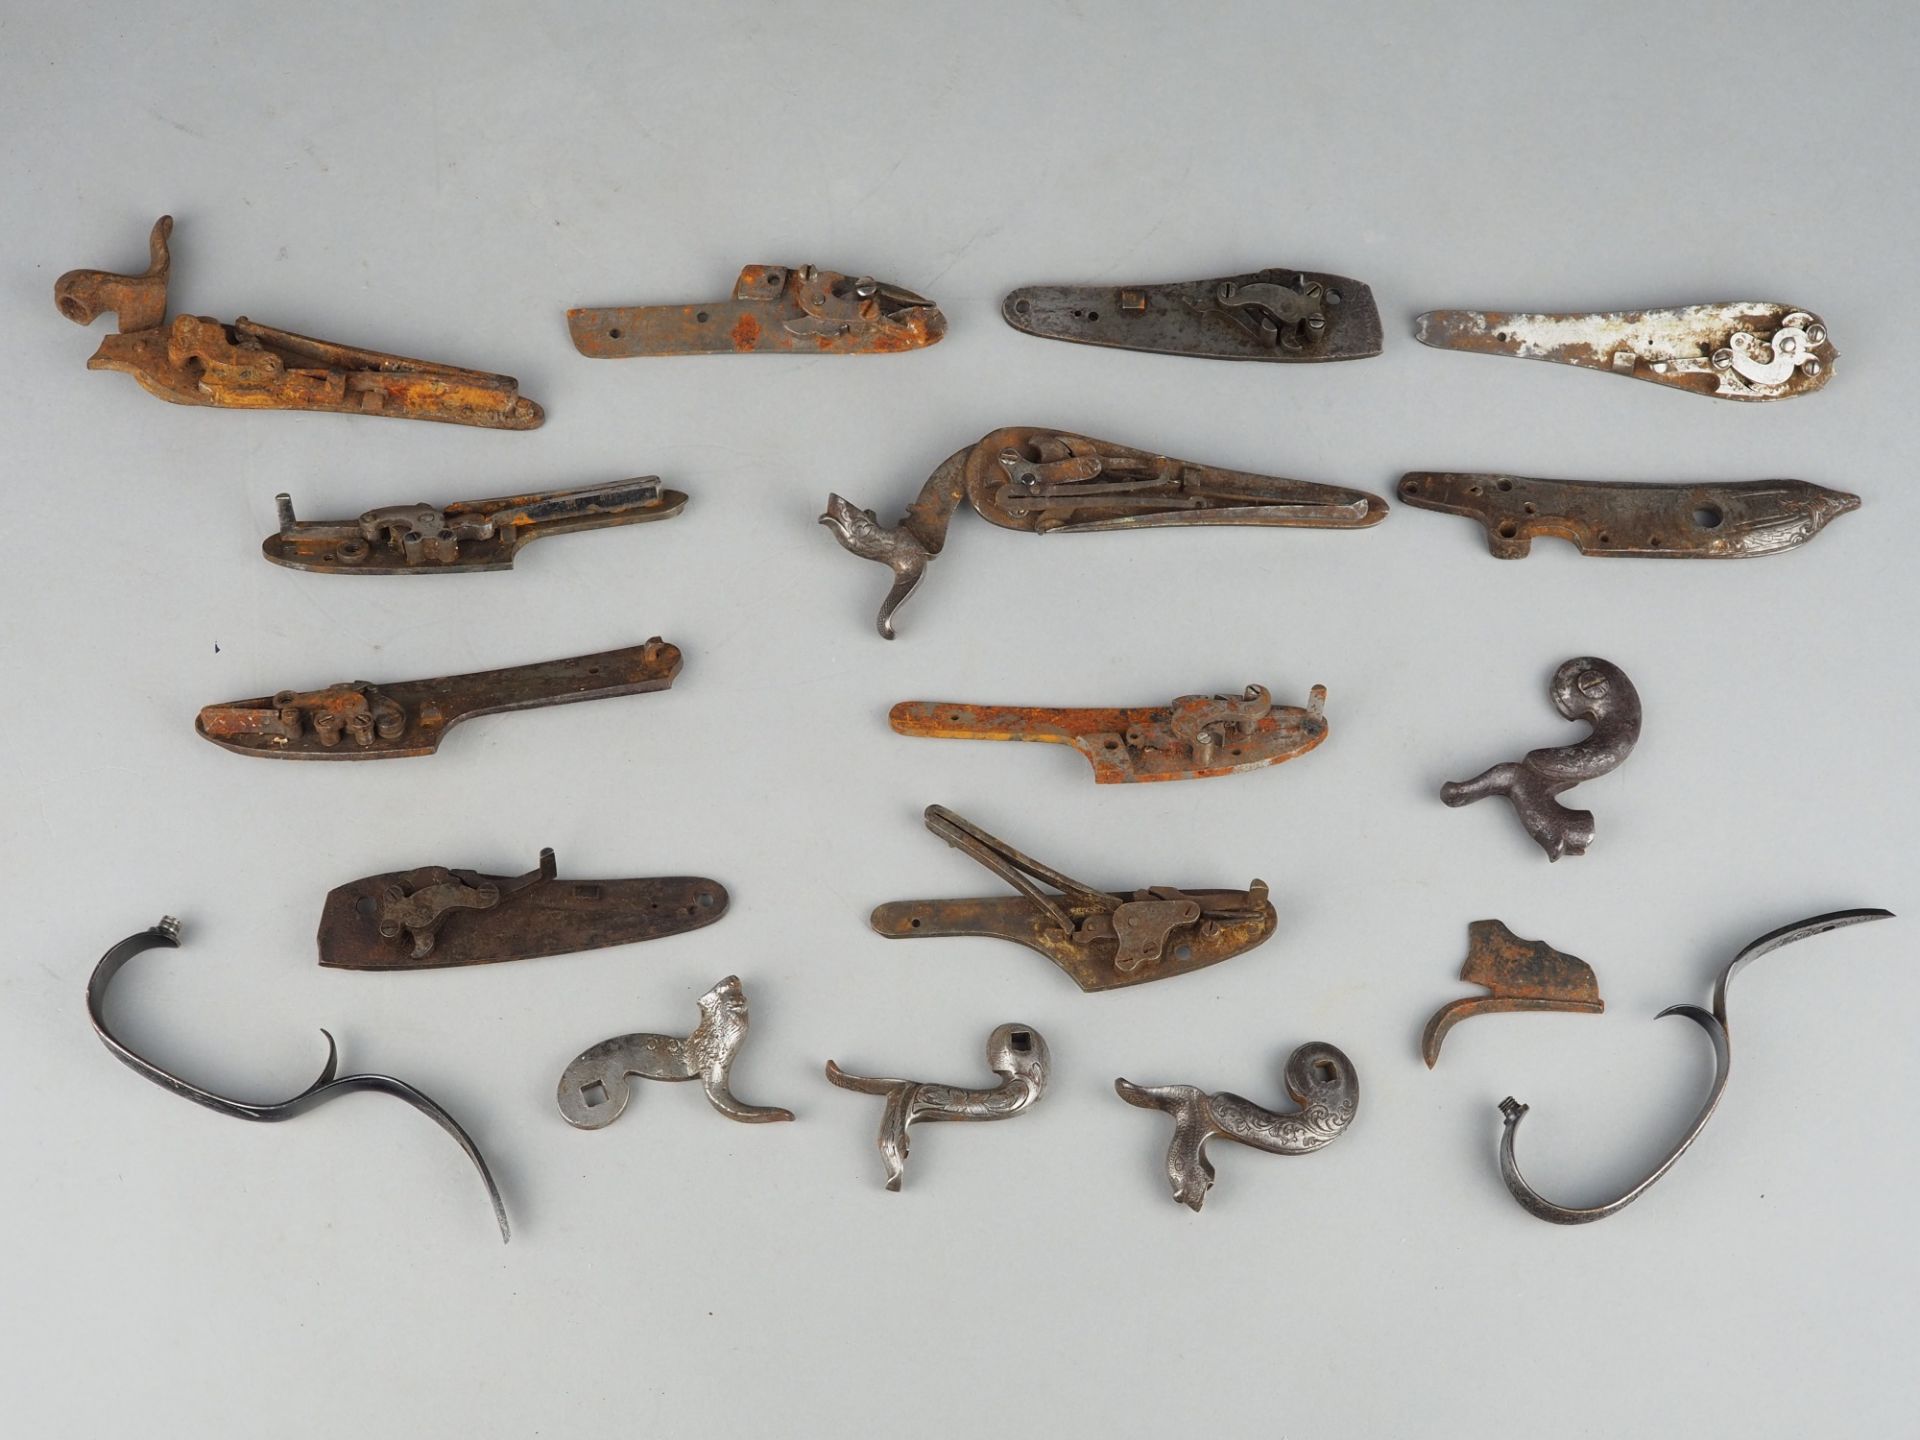 Convolute muzzleloader components / engraved snap locks 18th - 19th century.